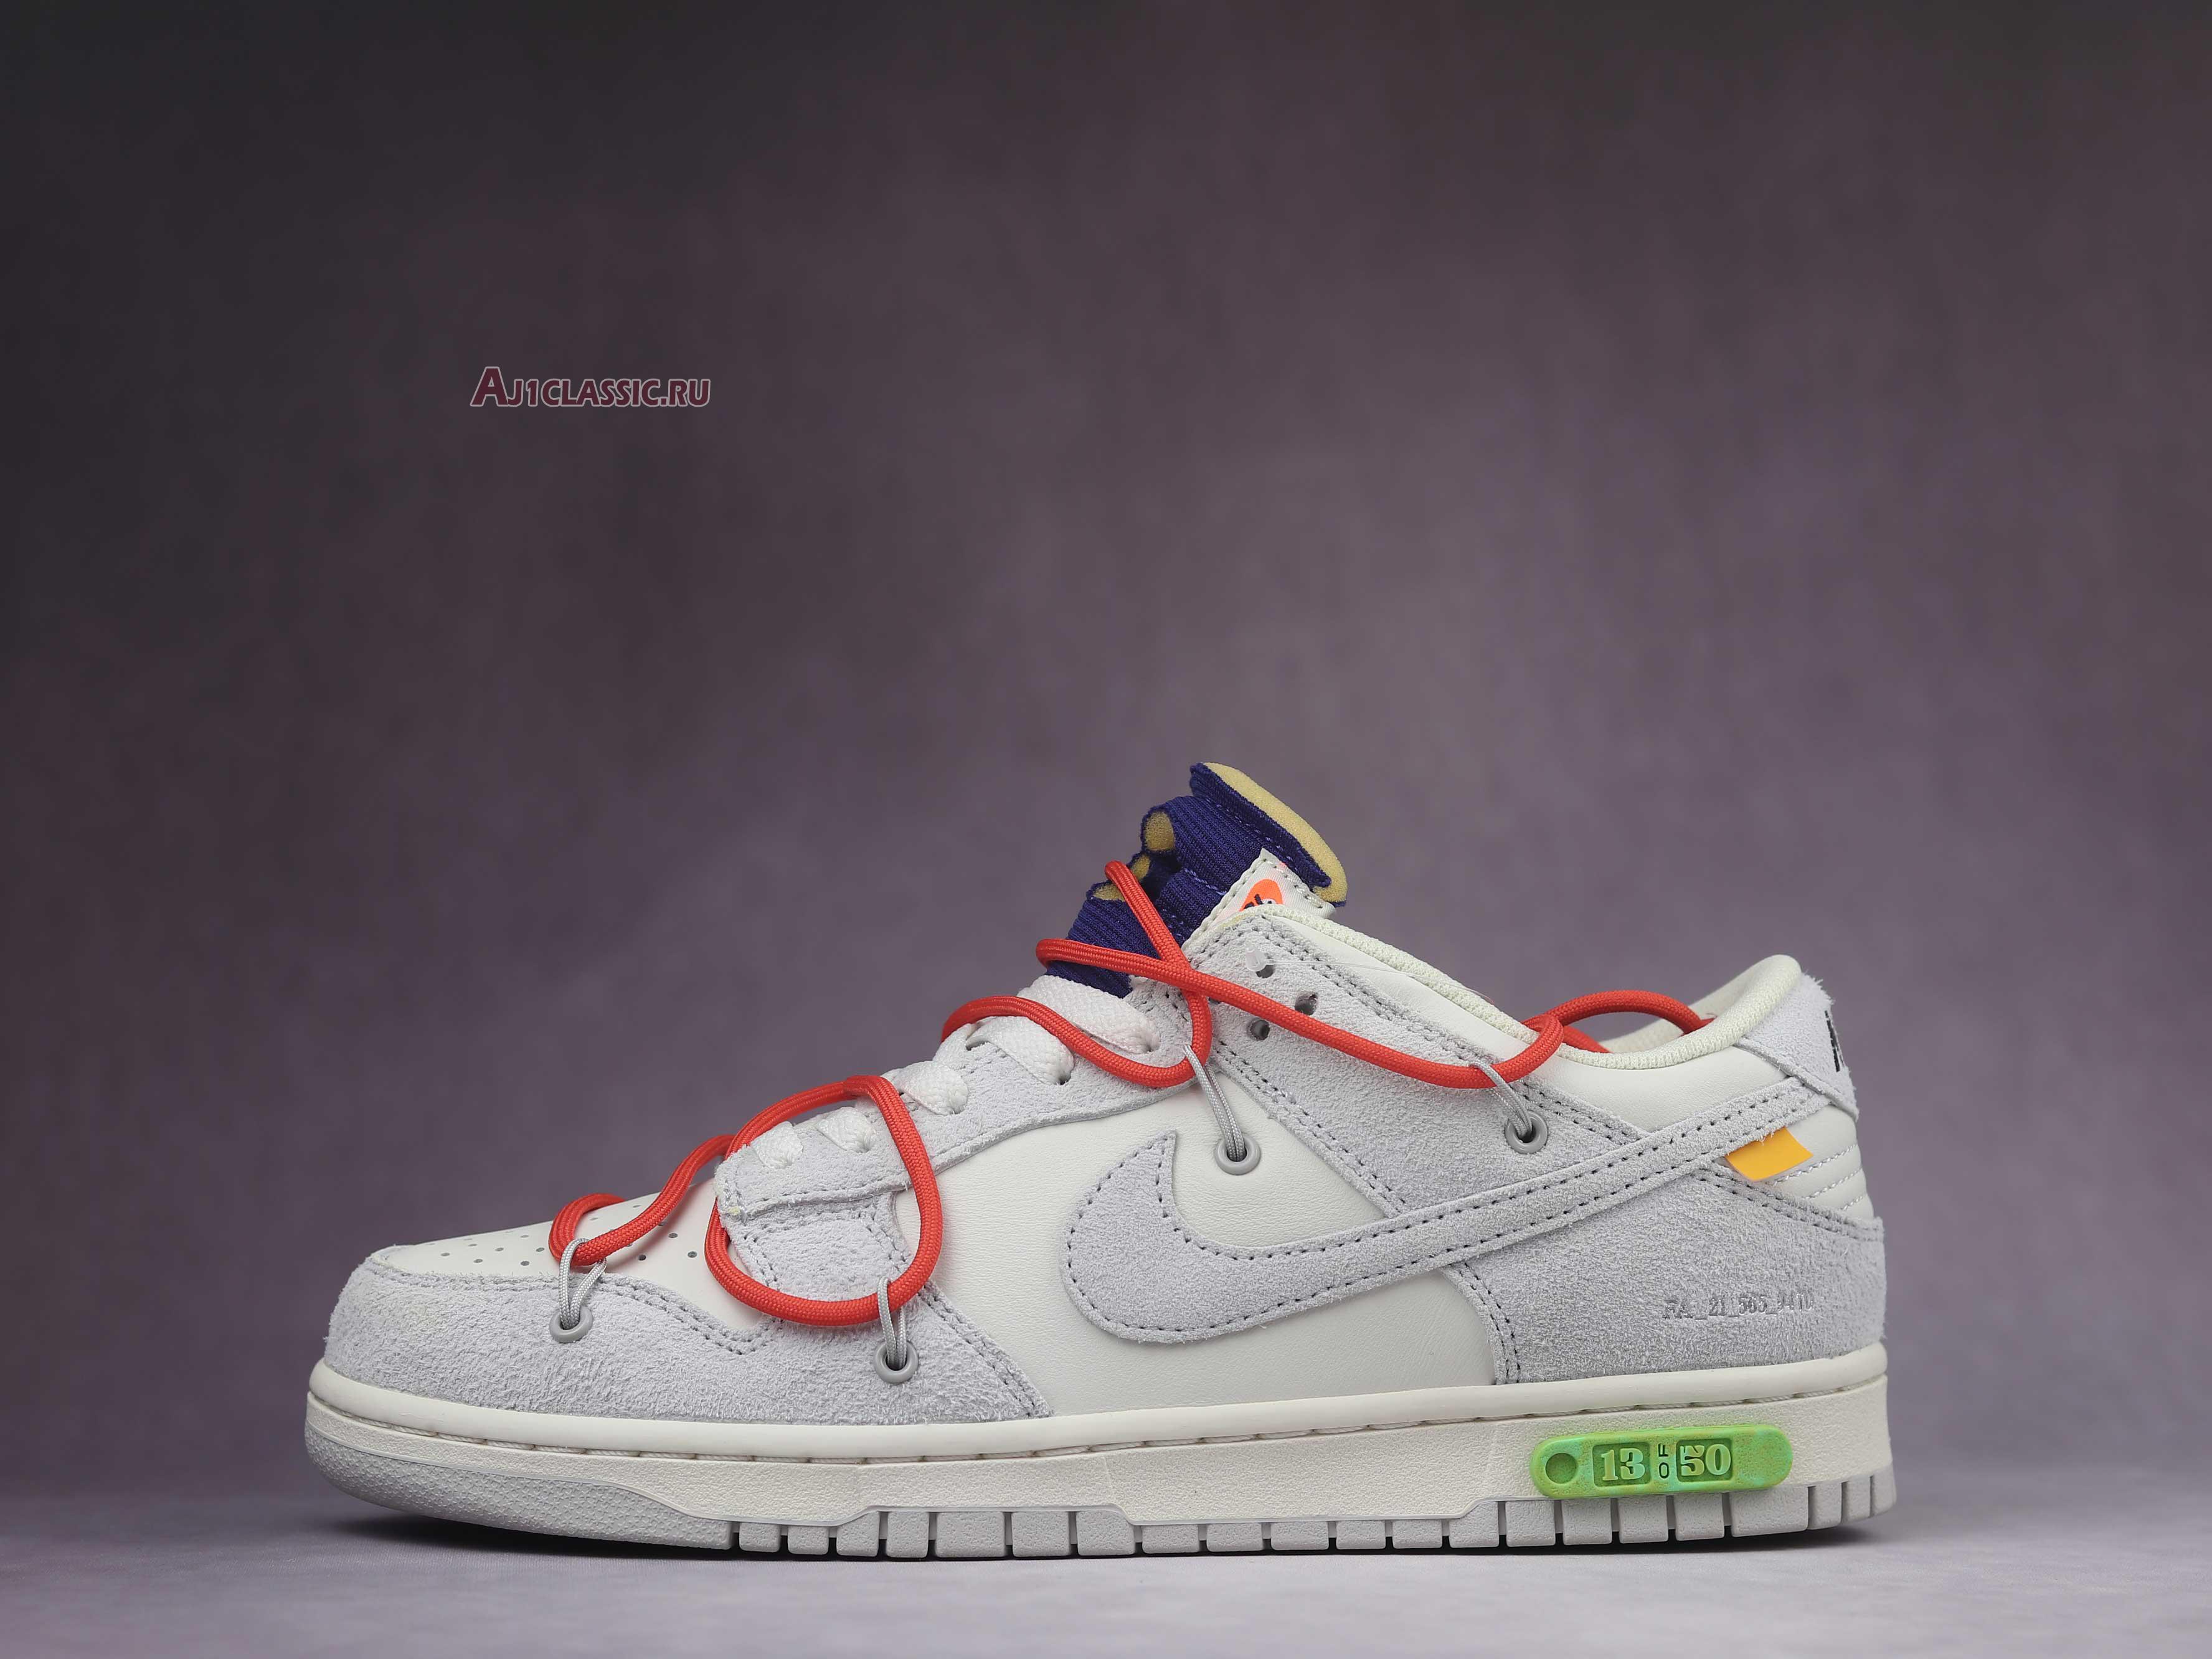 Off-White x Nike Dunk Low "Lot 13 of 50" DJ0950-110